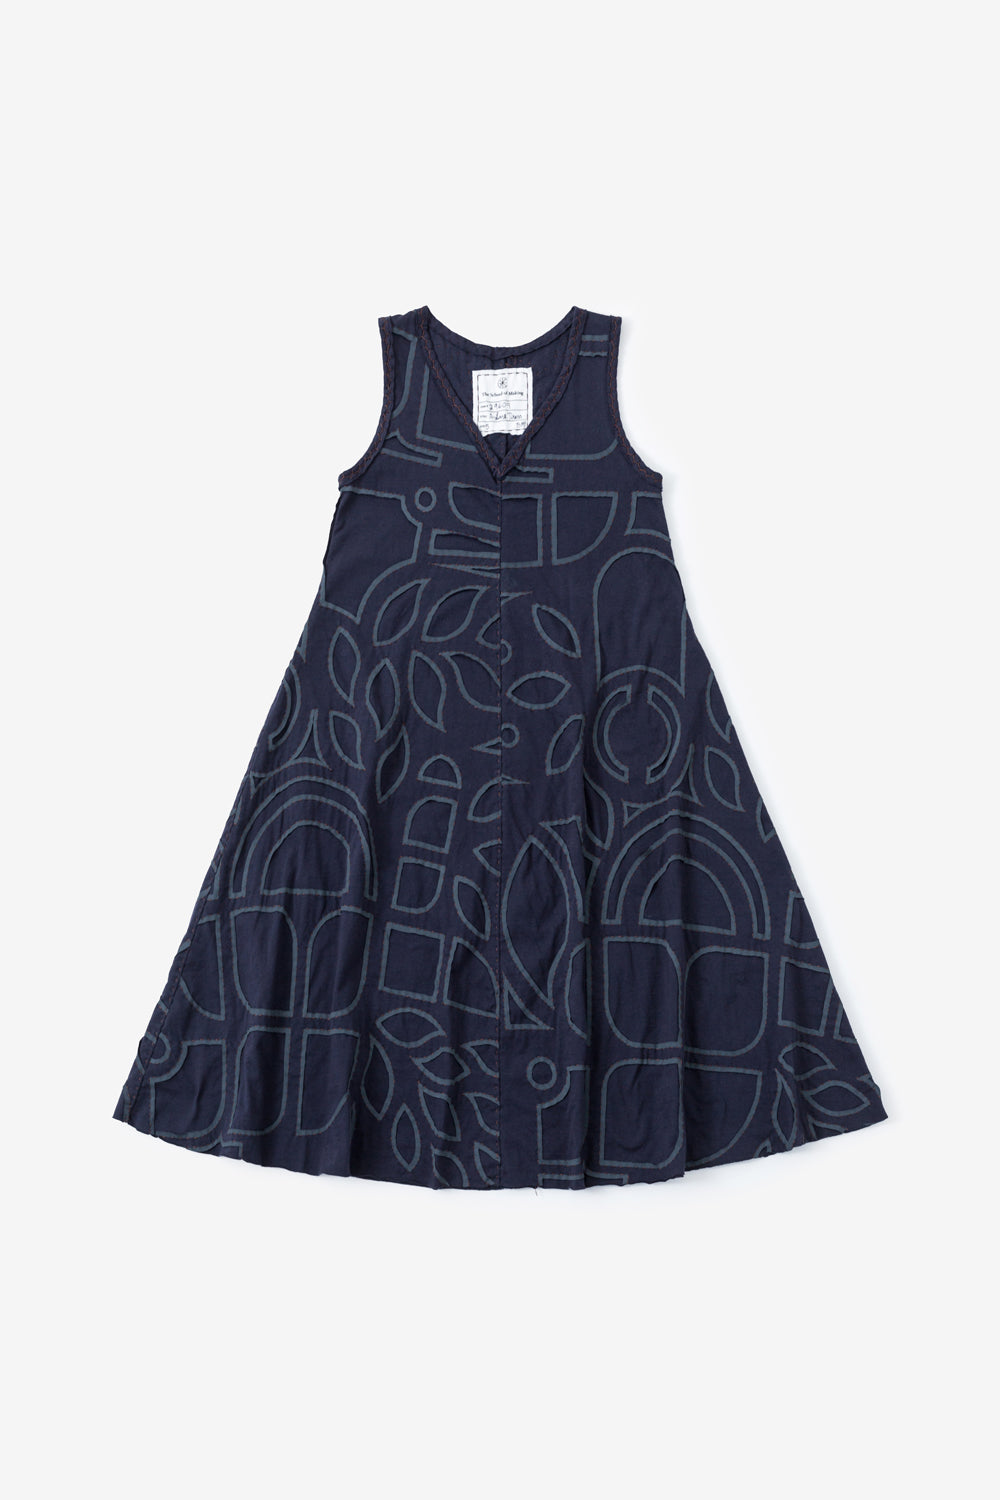 The A-Line Dress in navy with Abstract stencil.